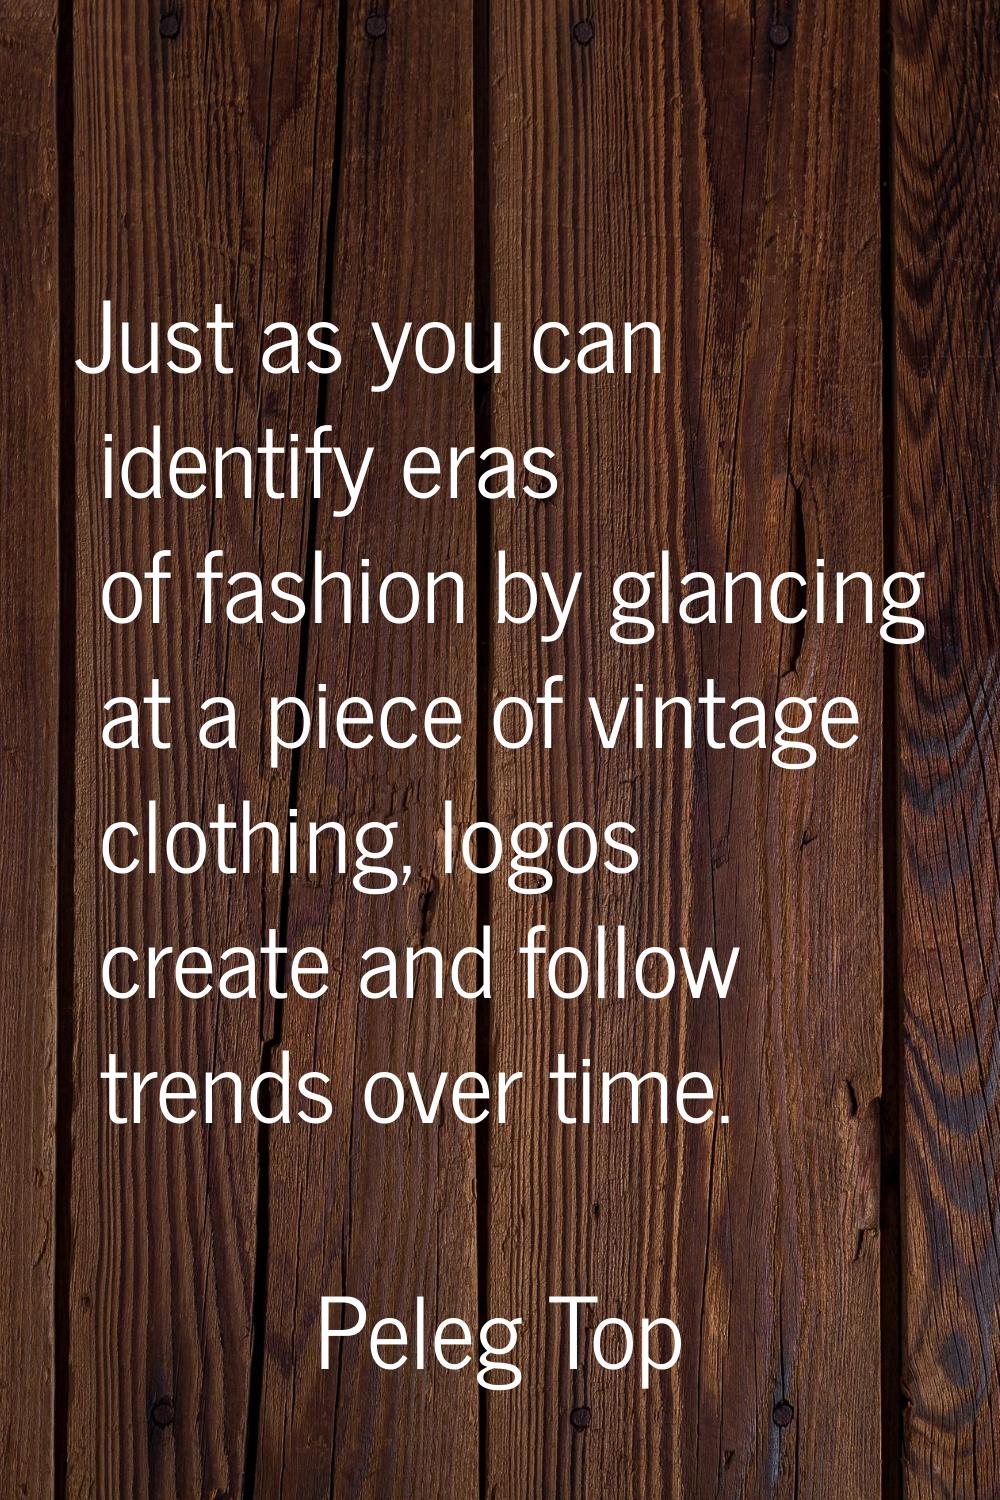 Just as you can identify eras of fashion by glancing at a piece of vintage clothing, logos create a